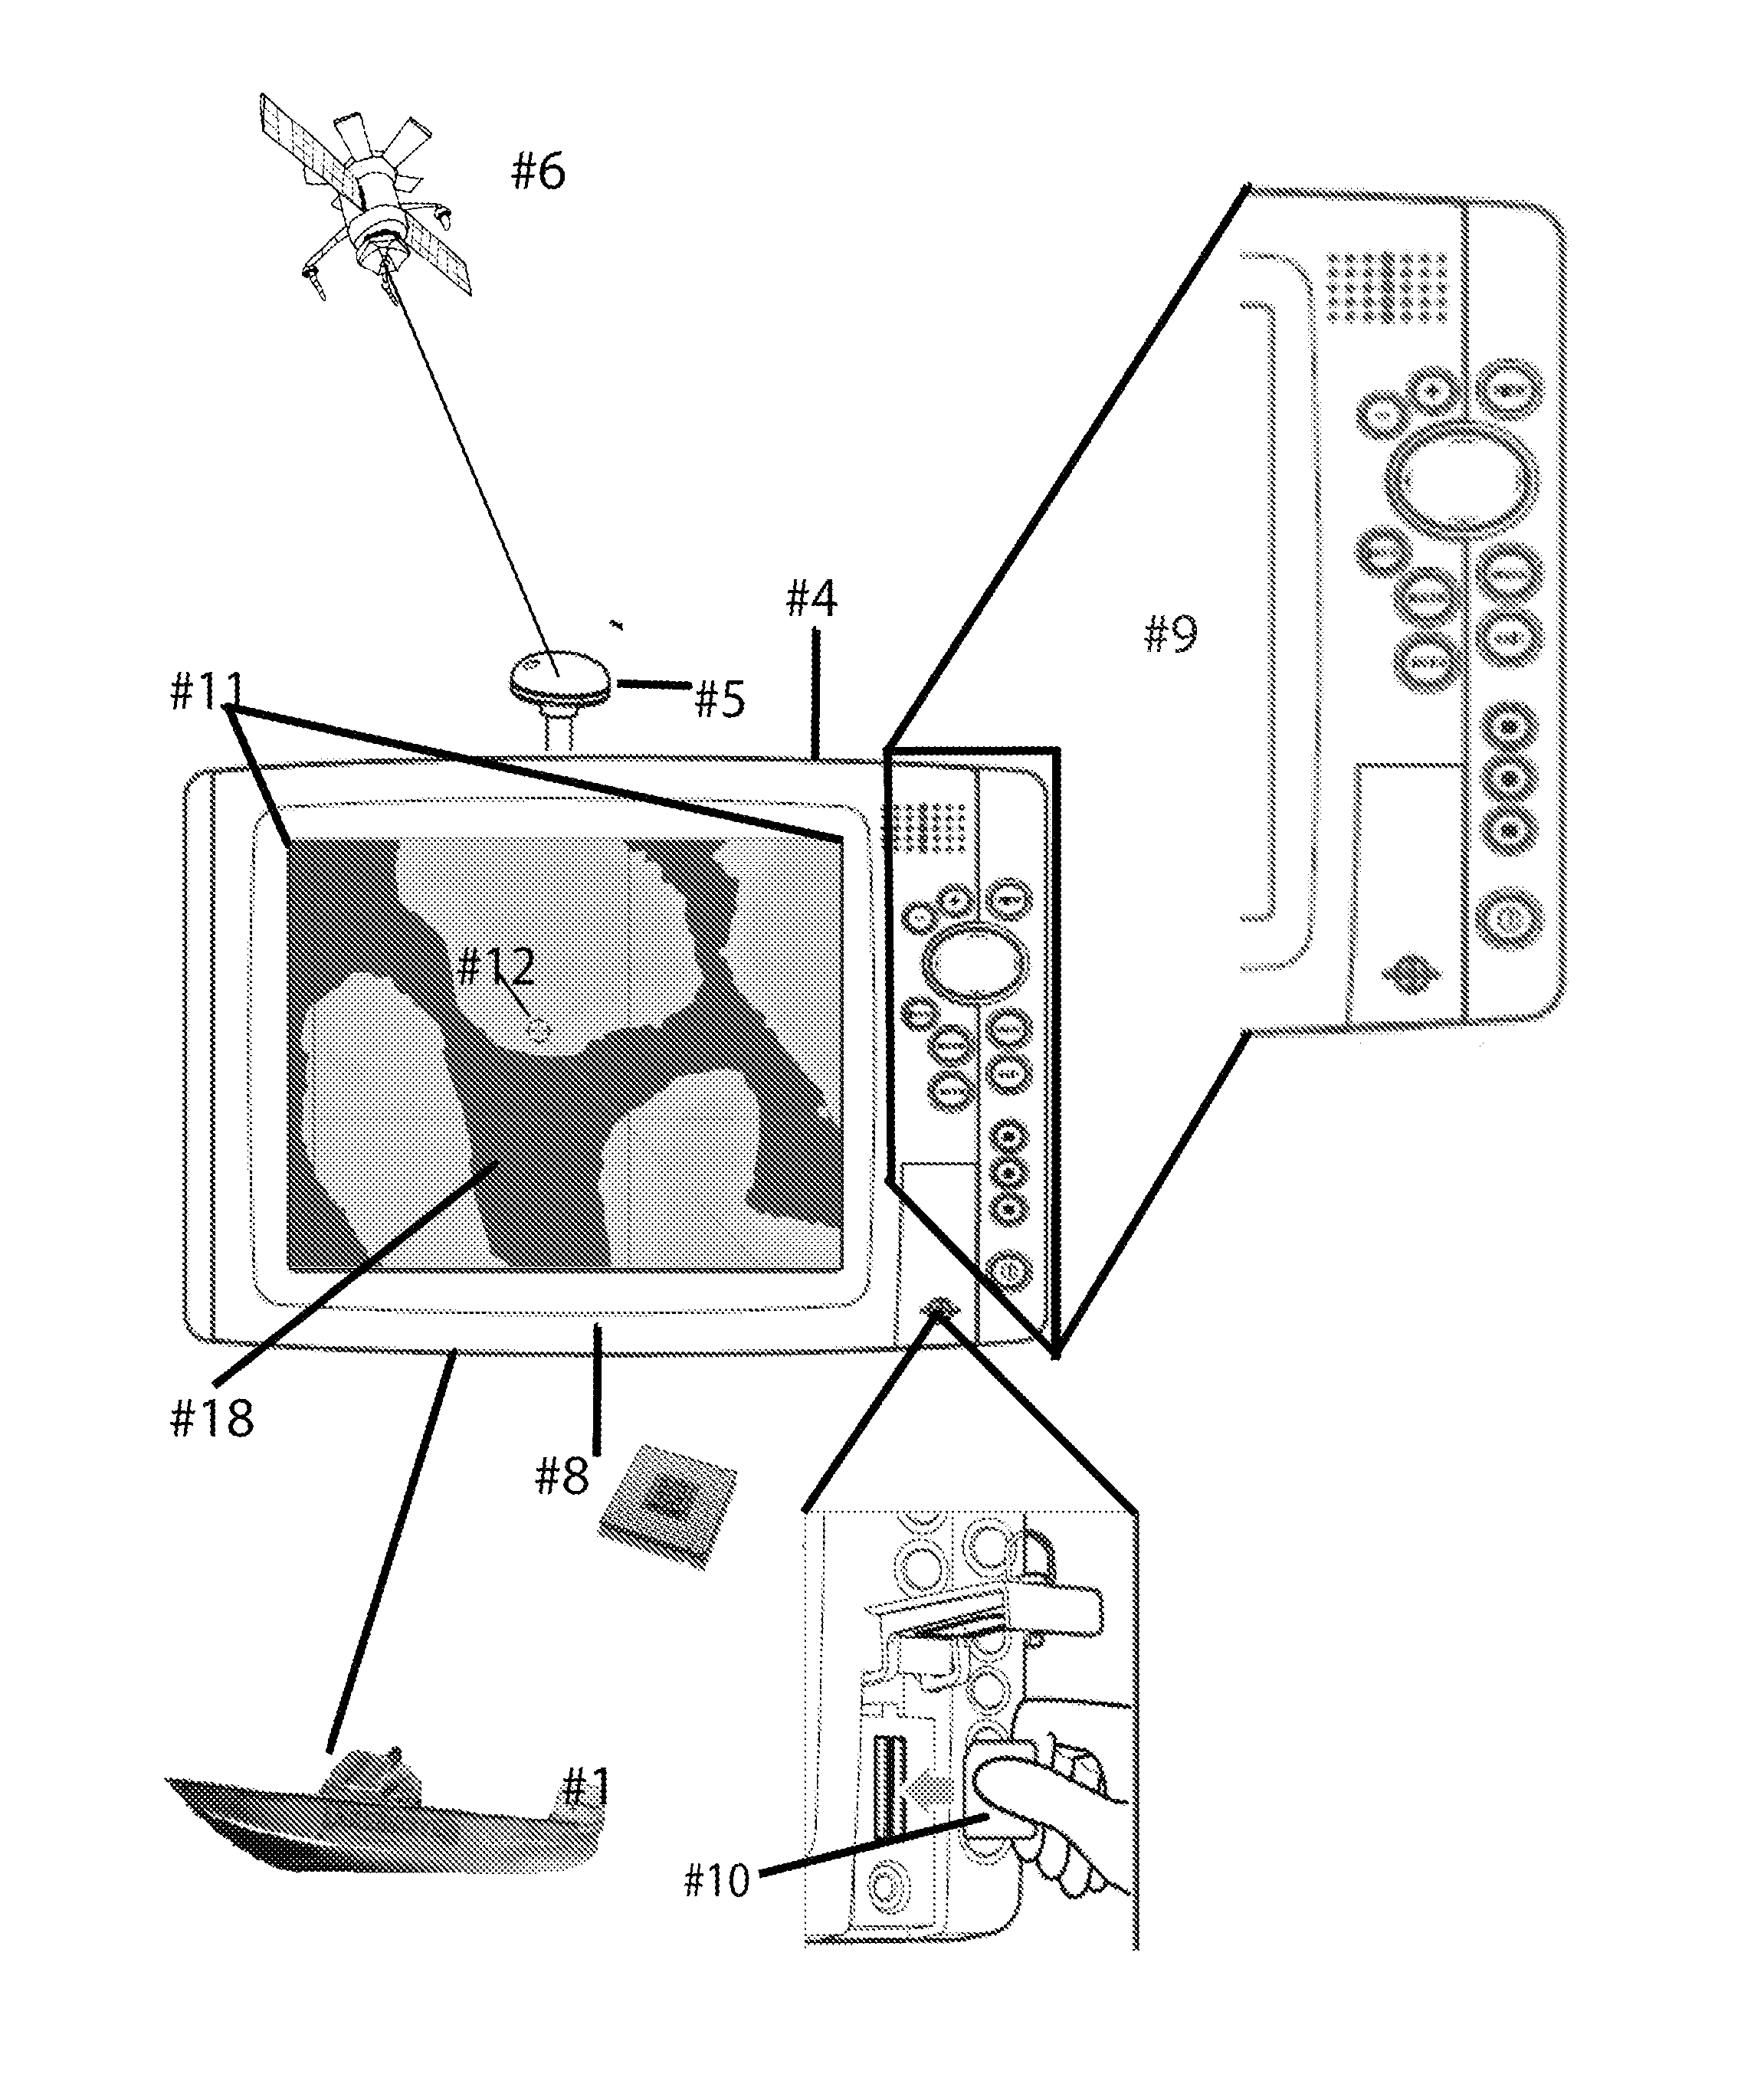 Shallow water highlight method and display systems